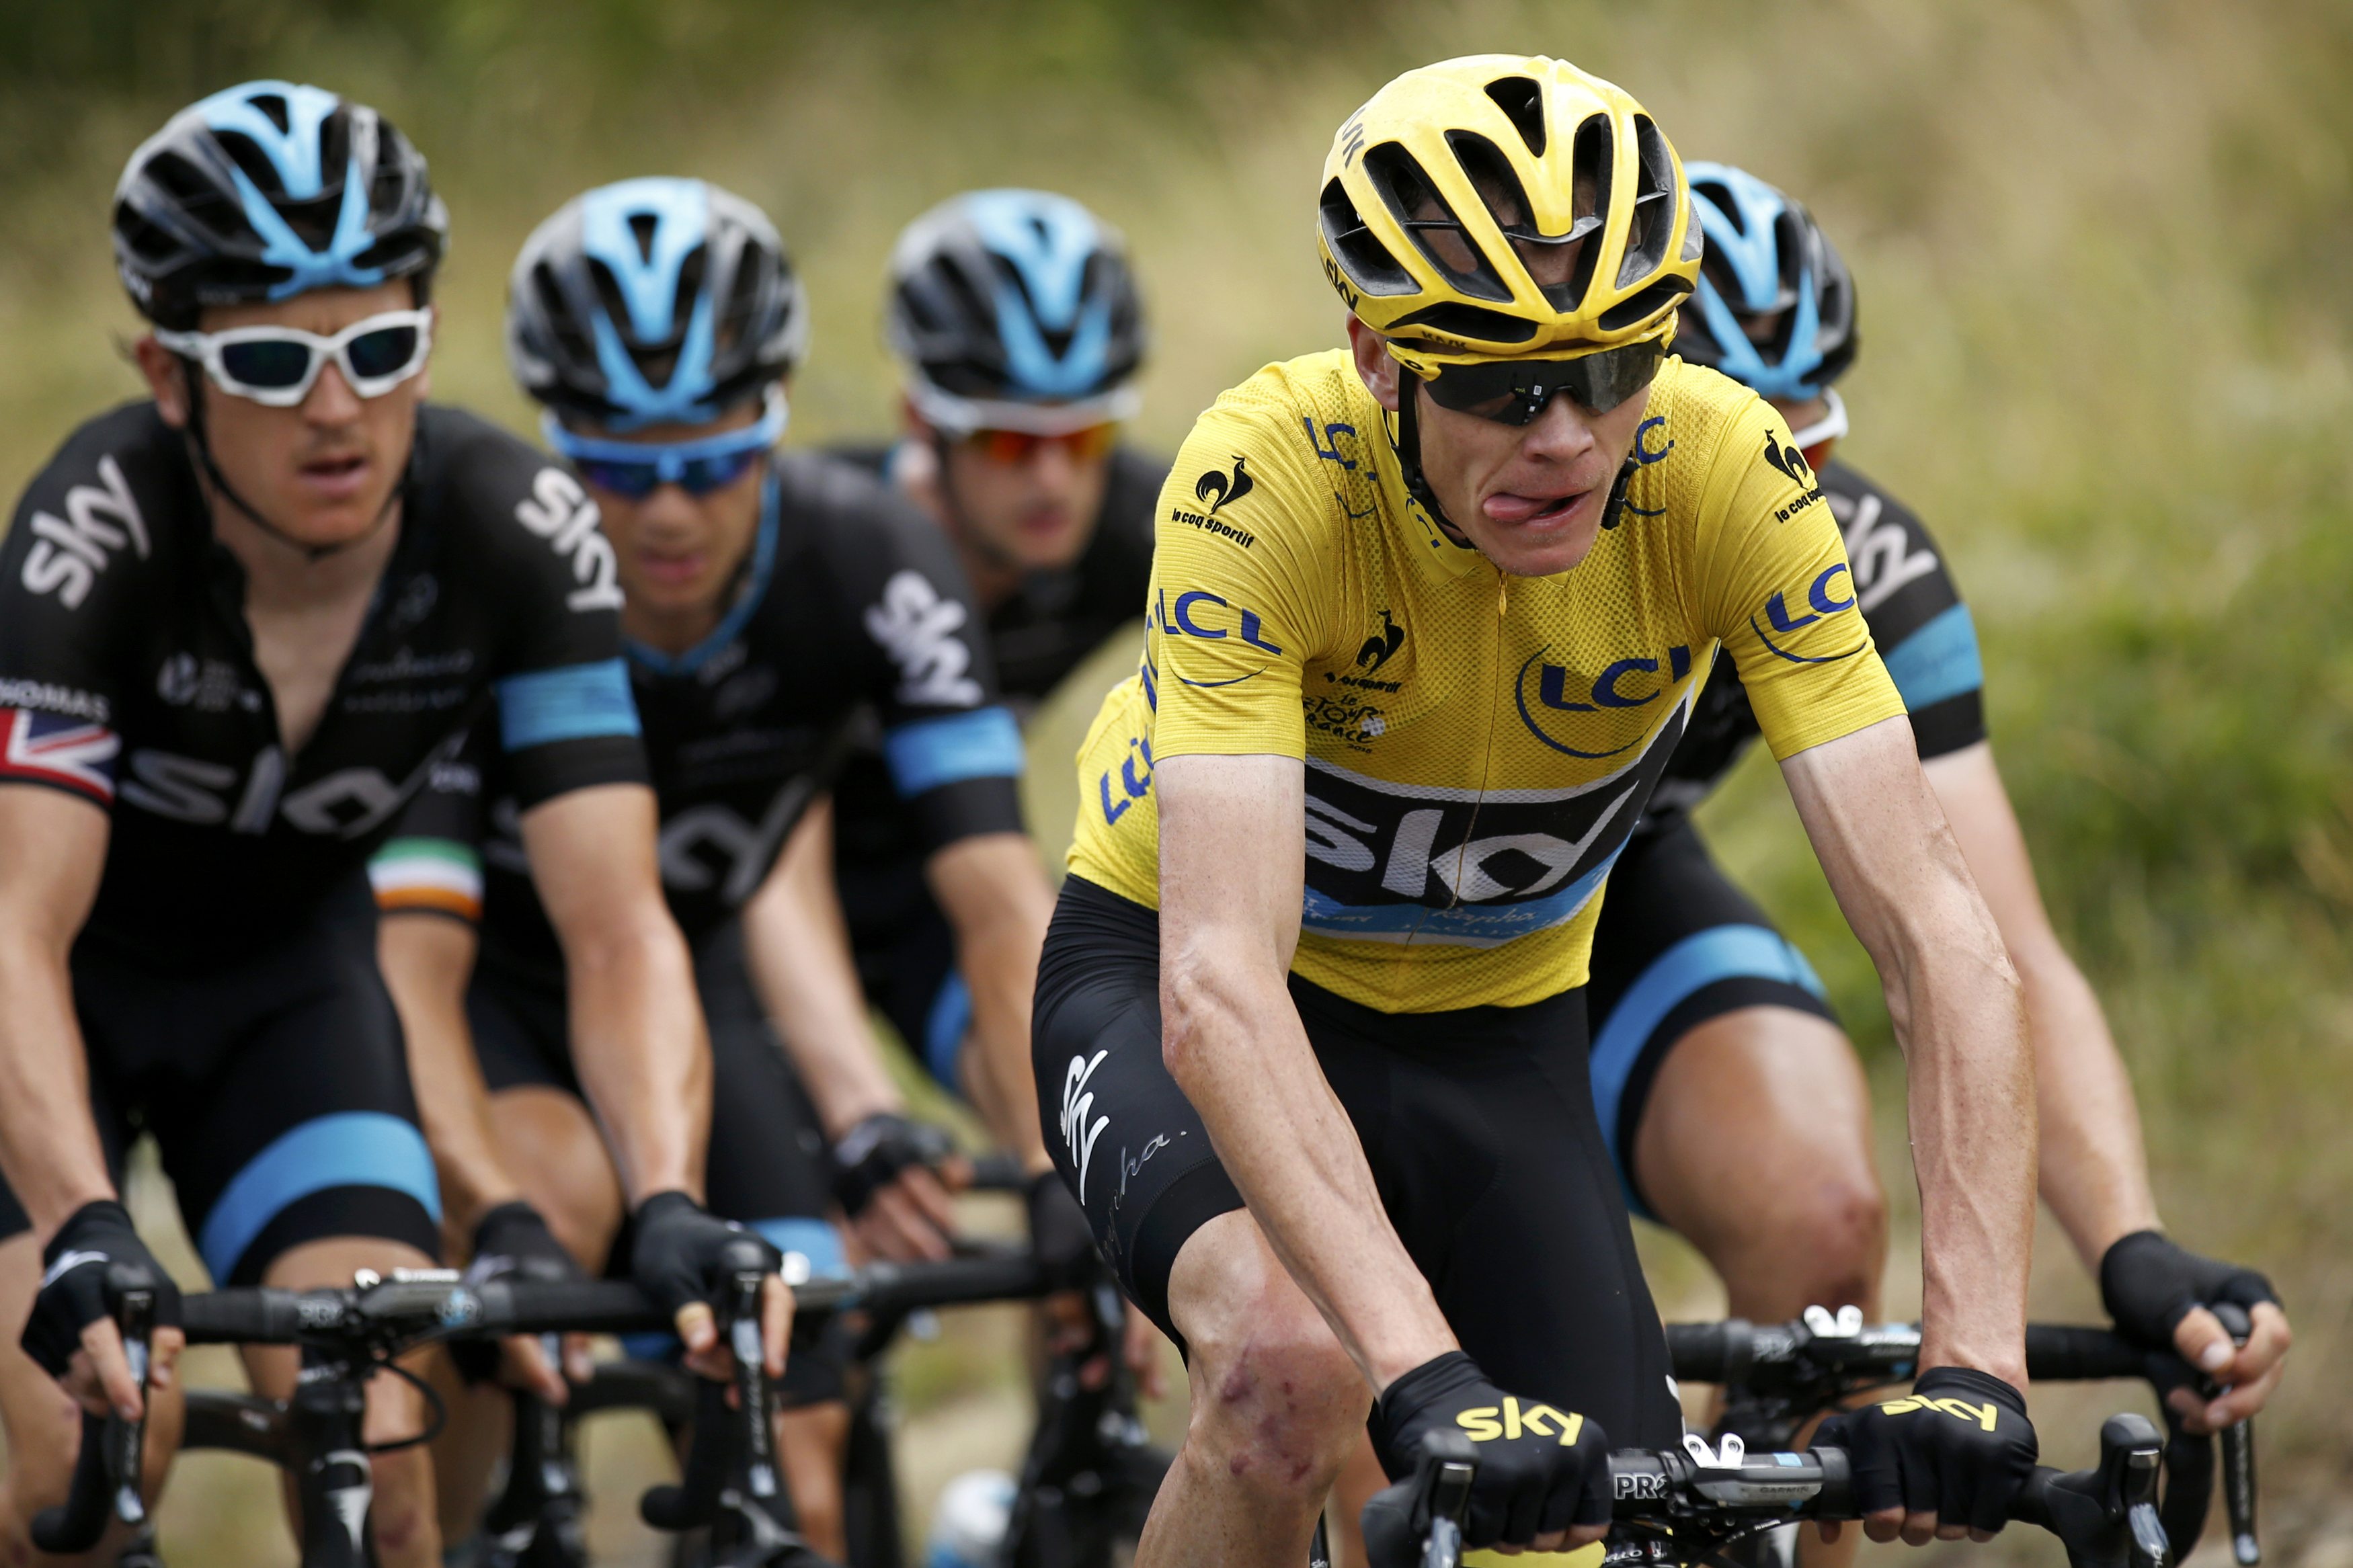 Chris Froome faced another media grilling after Sunday's stage. Photo: Reuters